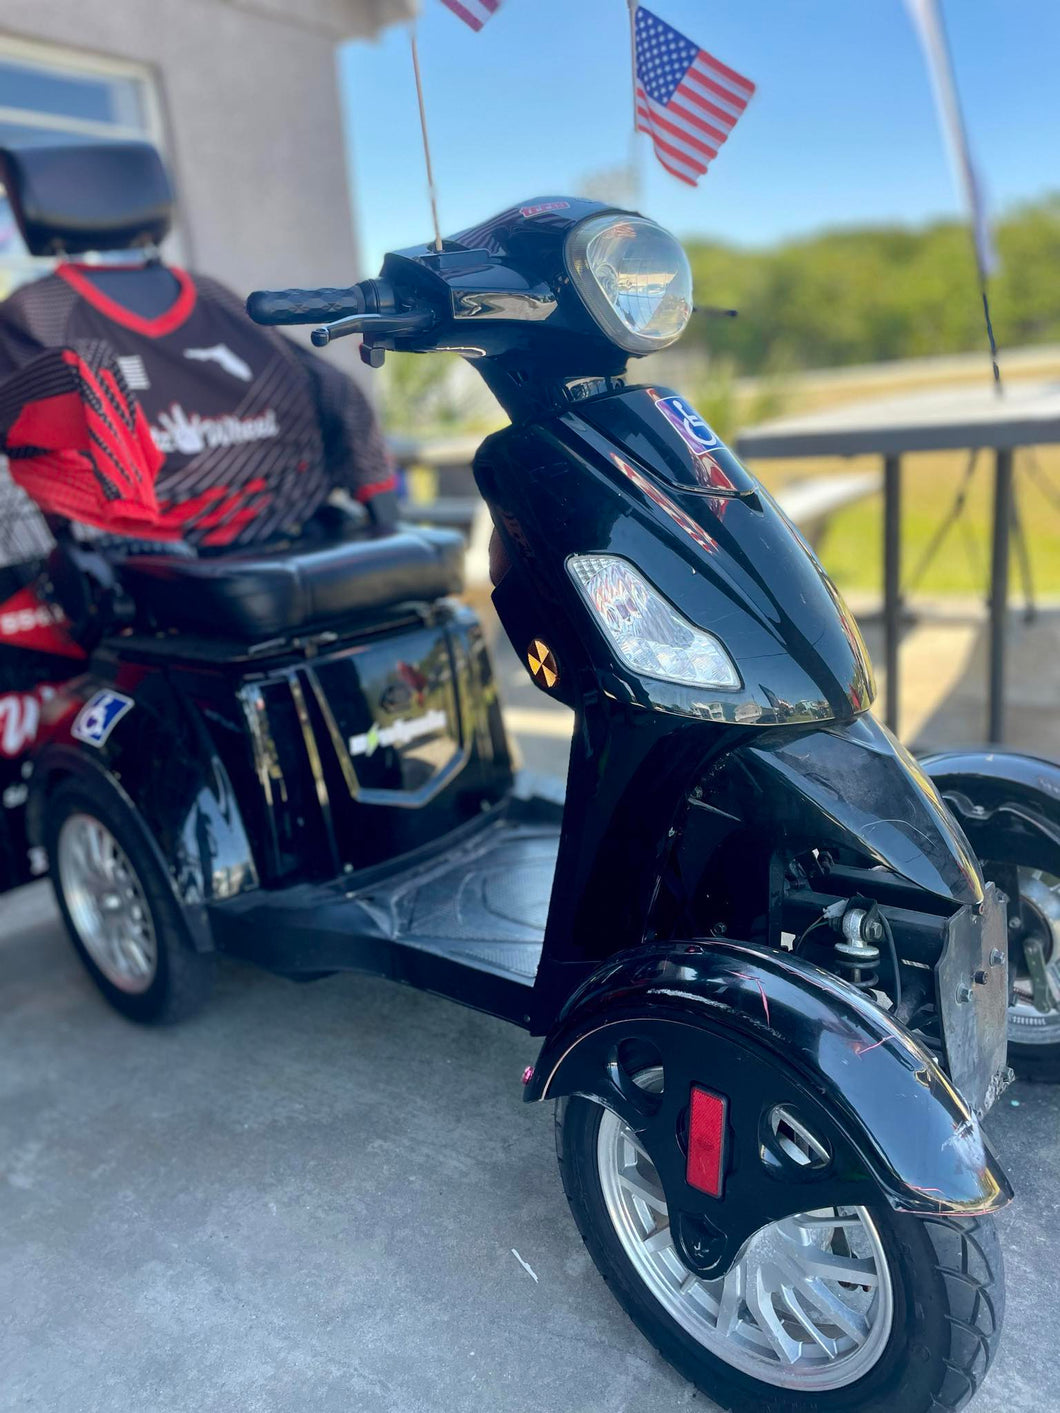 Mobility Scooter ADA For Handicap Use Daily Rental